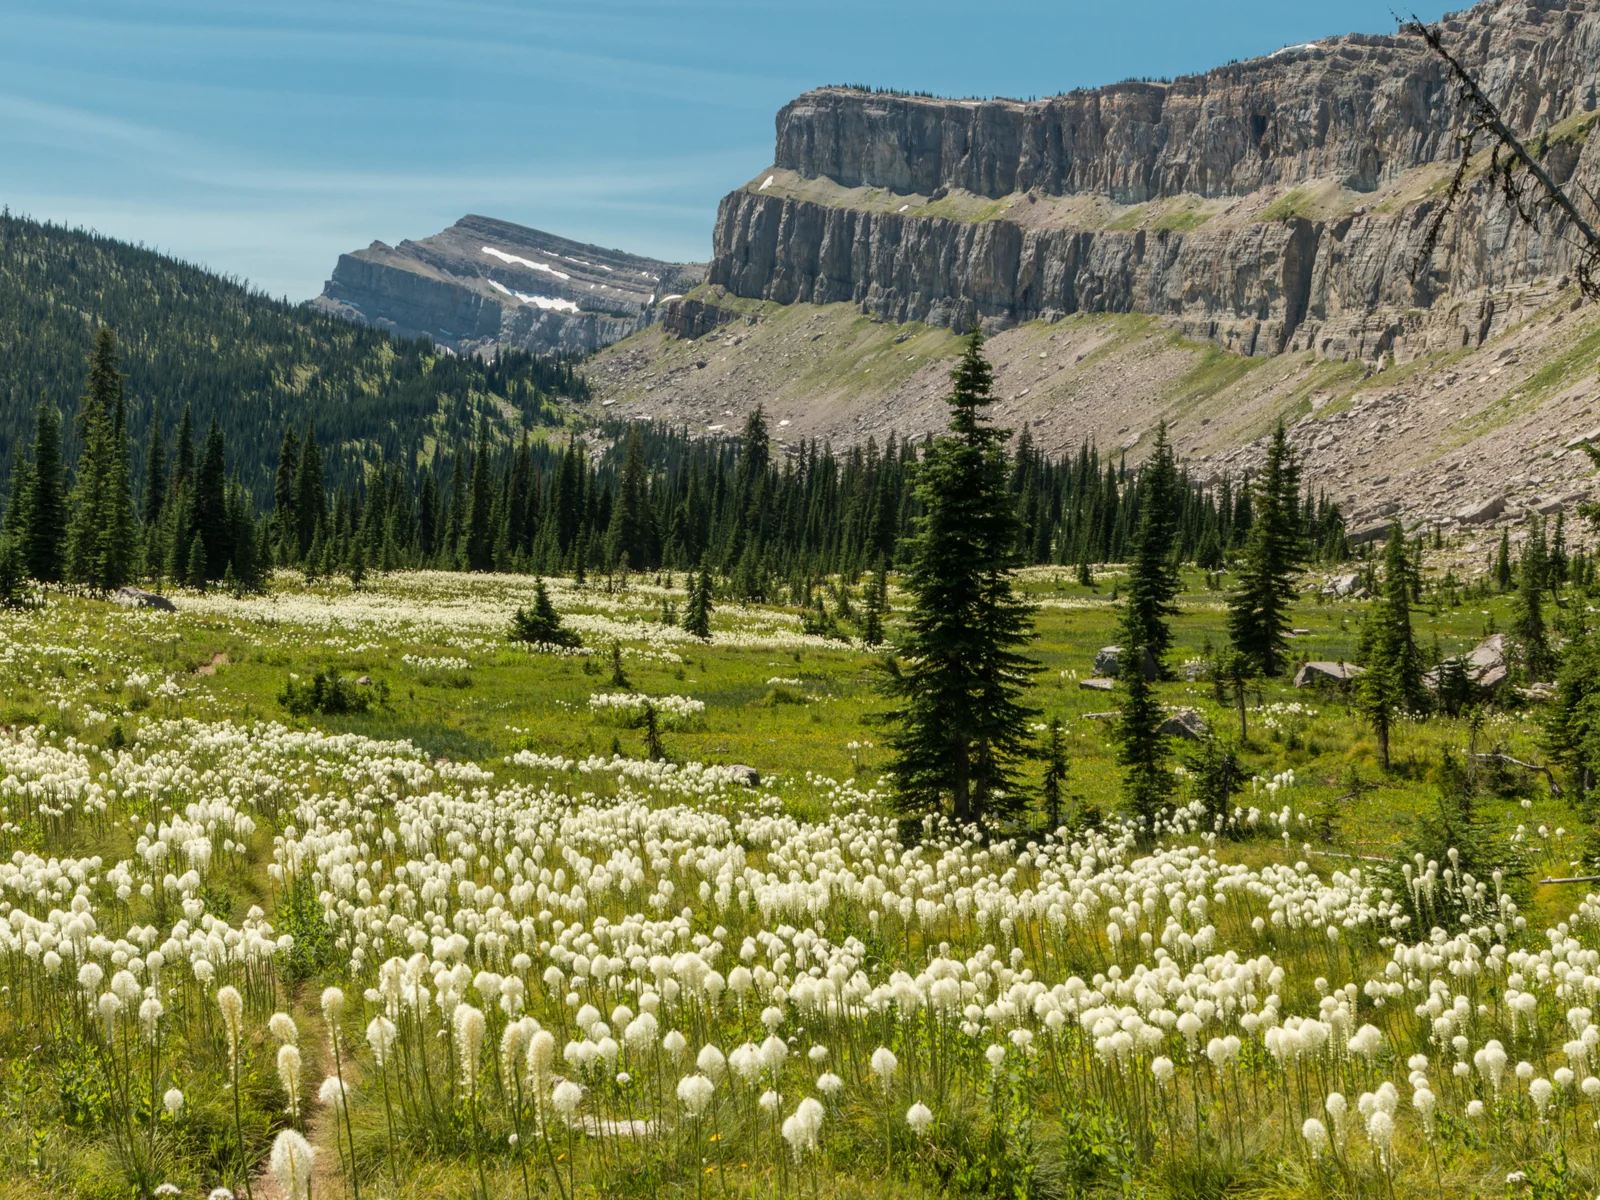 Bear grass in a pasture below Chinese Wall, one of the best places to visit in Montana